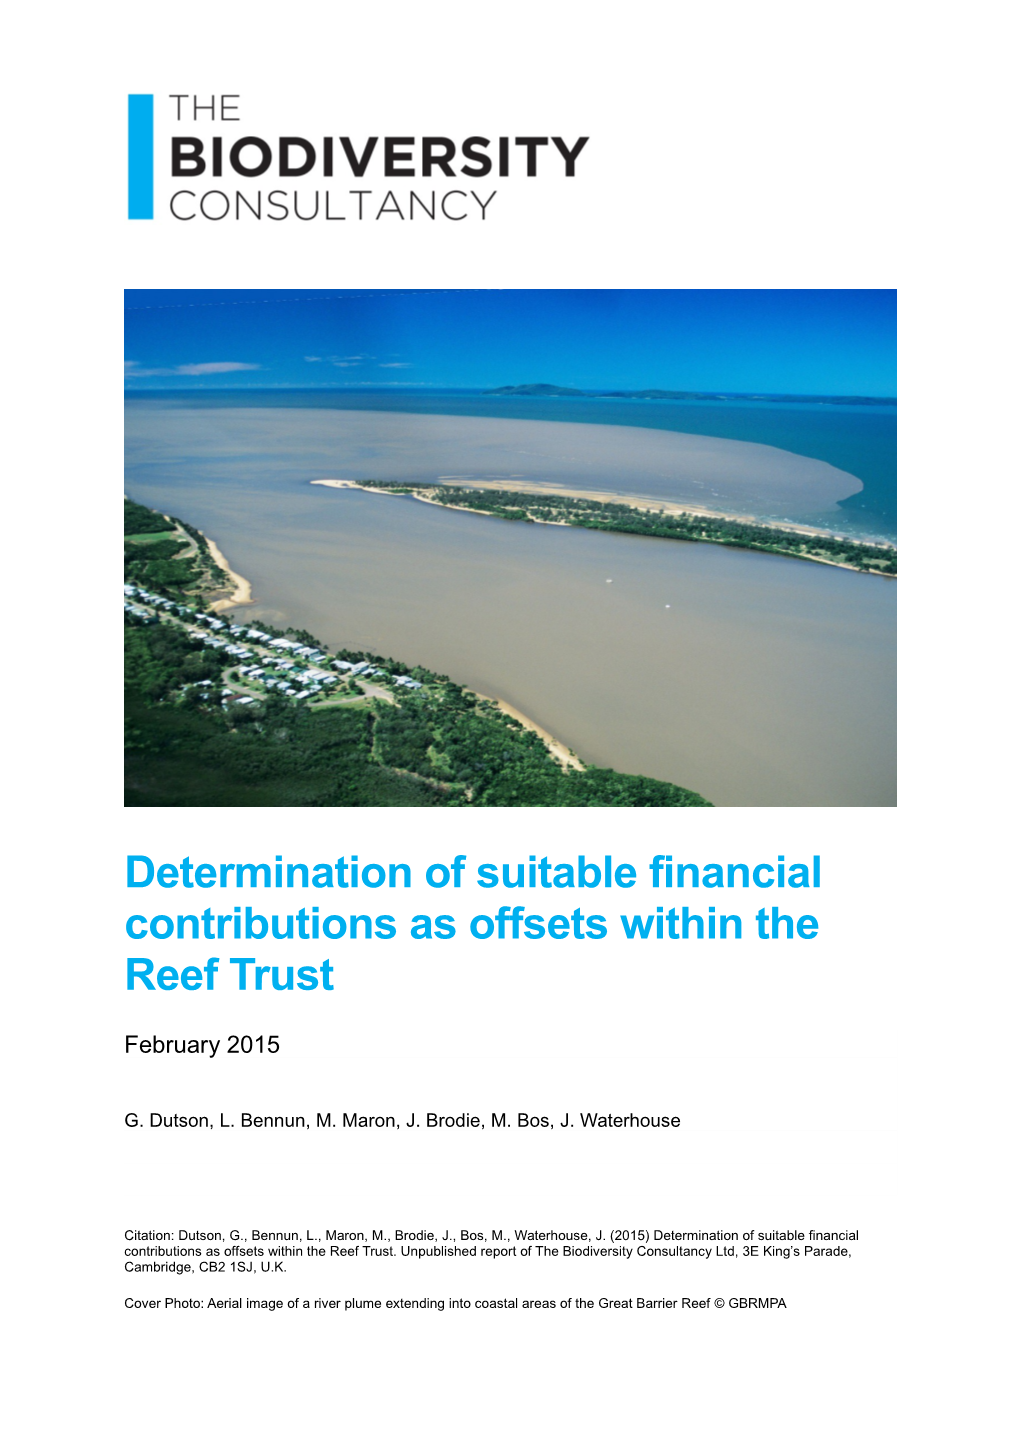 Determination of Suitable Financial Contributions As Offsets Within the Reef Trust